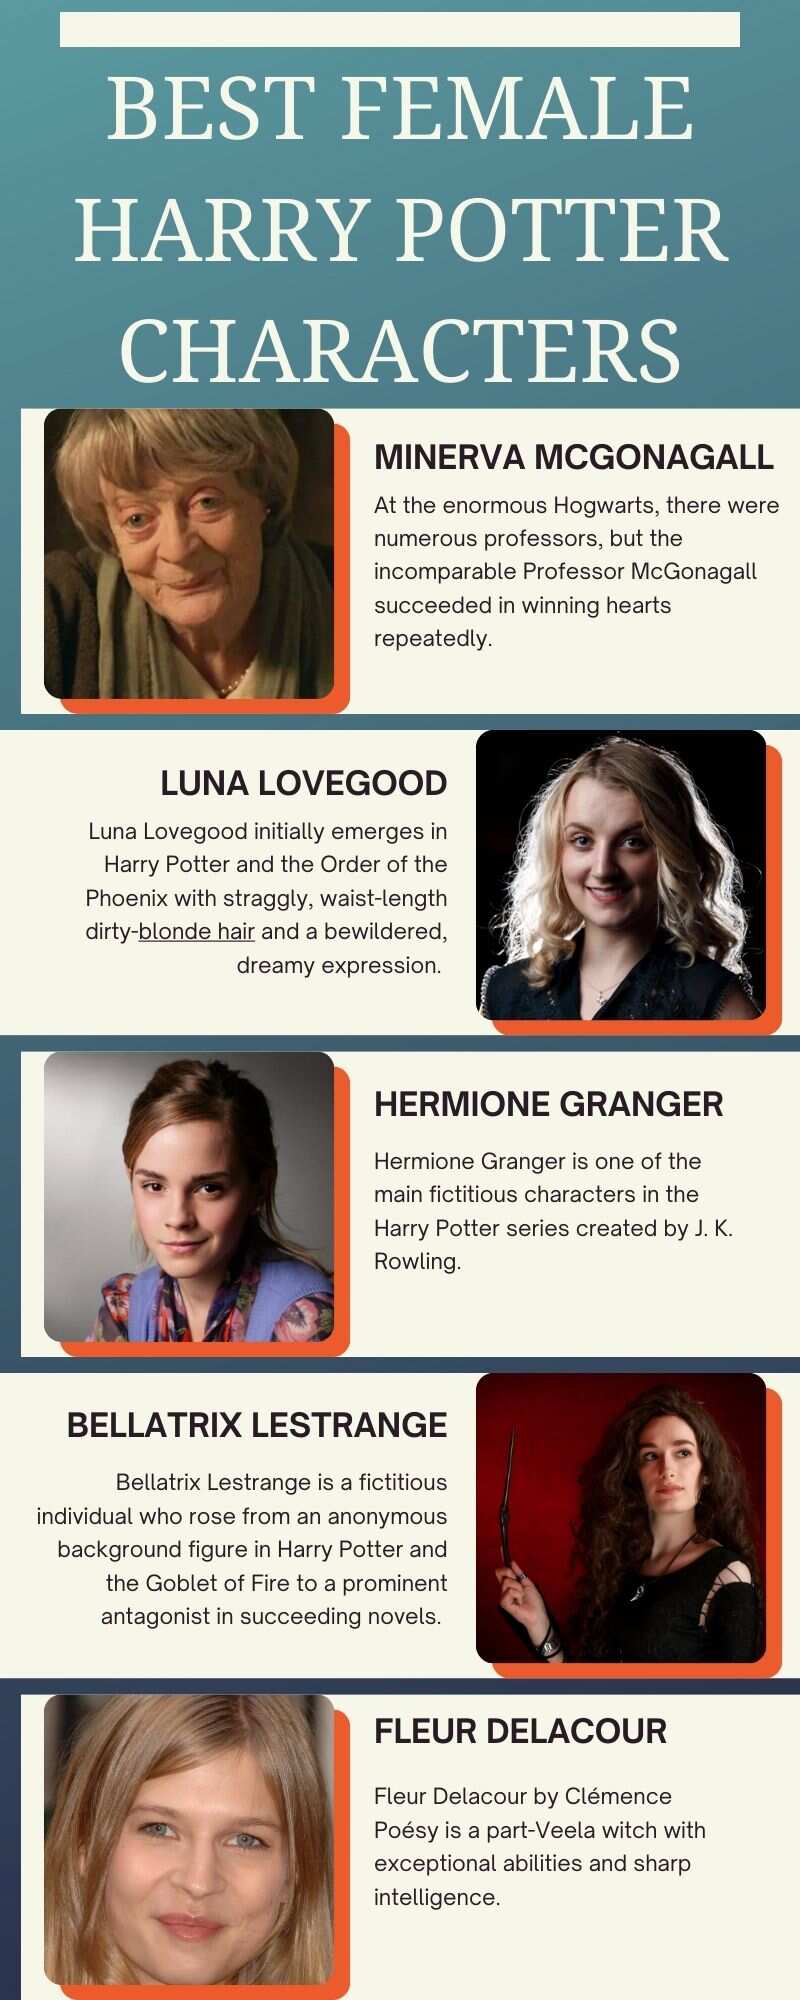 Best female Harry Potter characters